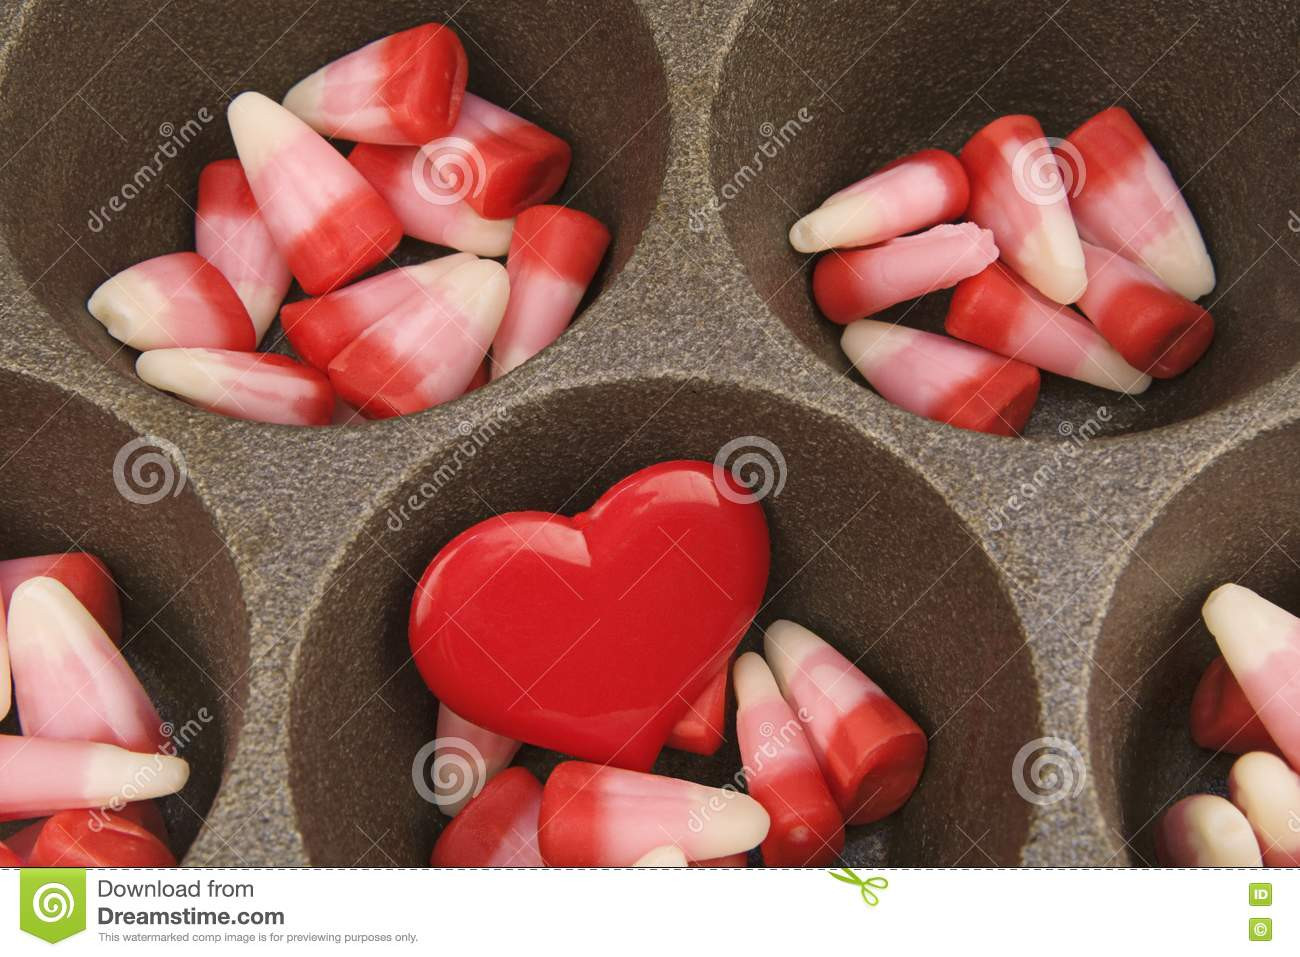 Valentines Day Candy Corn
 Valentine s Day Candy Corn With Red Heart Stock